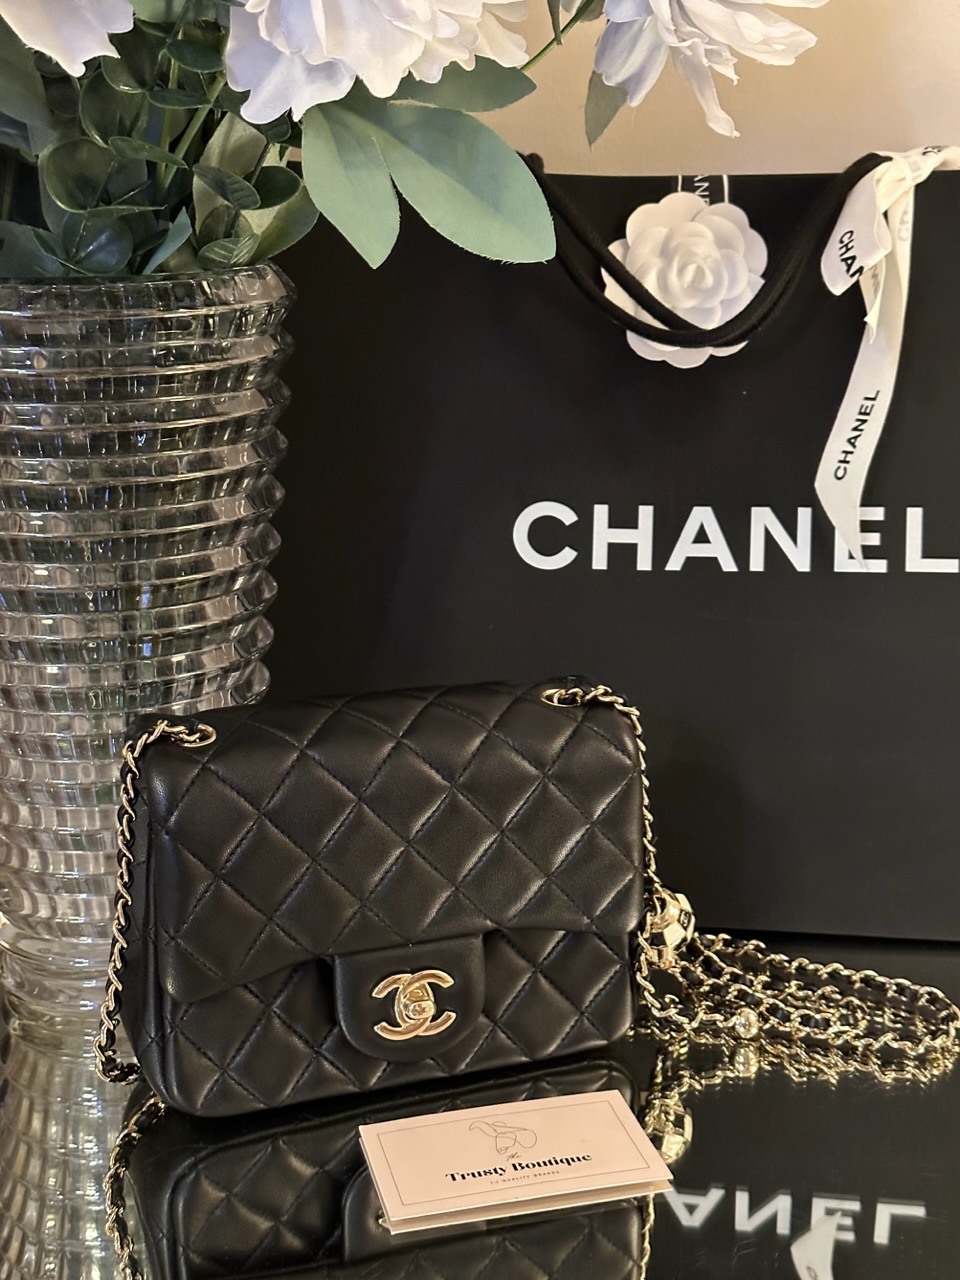 Chanel Black Quilted Leather Mini Square Pearl Crush Flap Bag Chanel